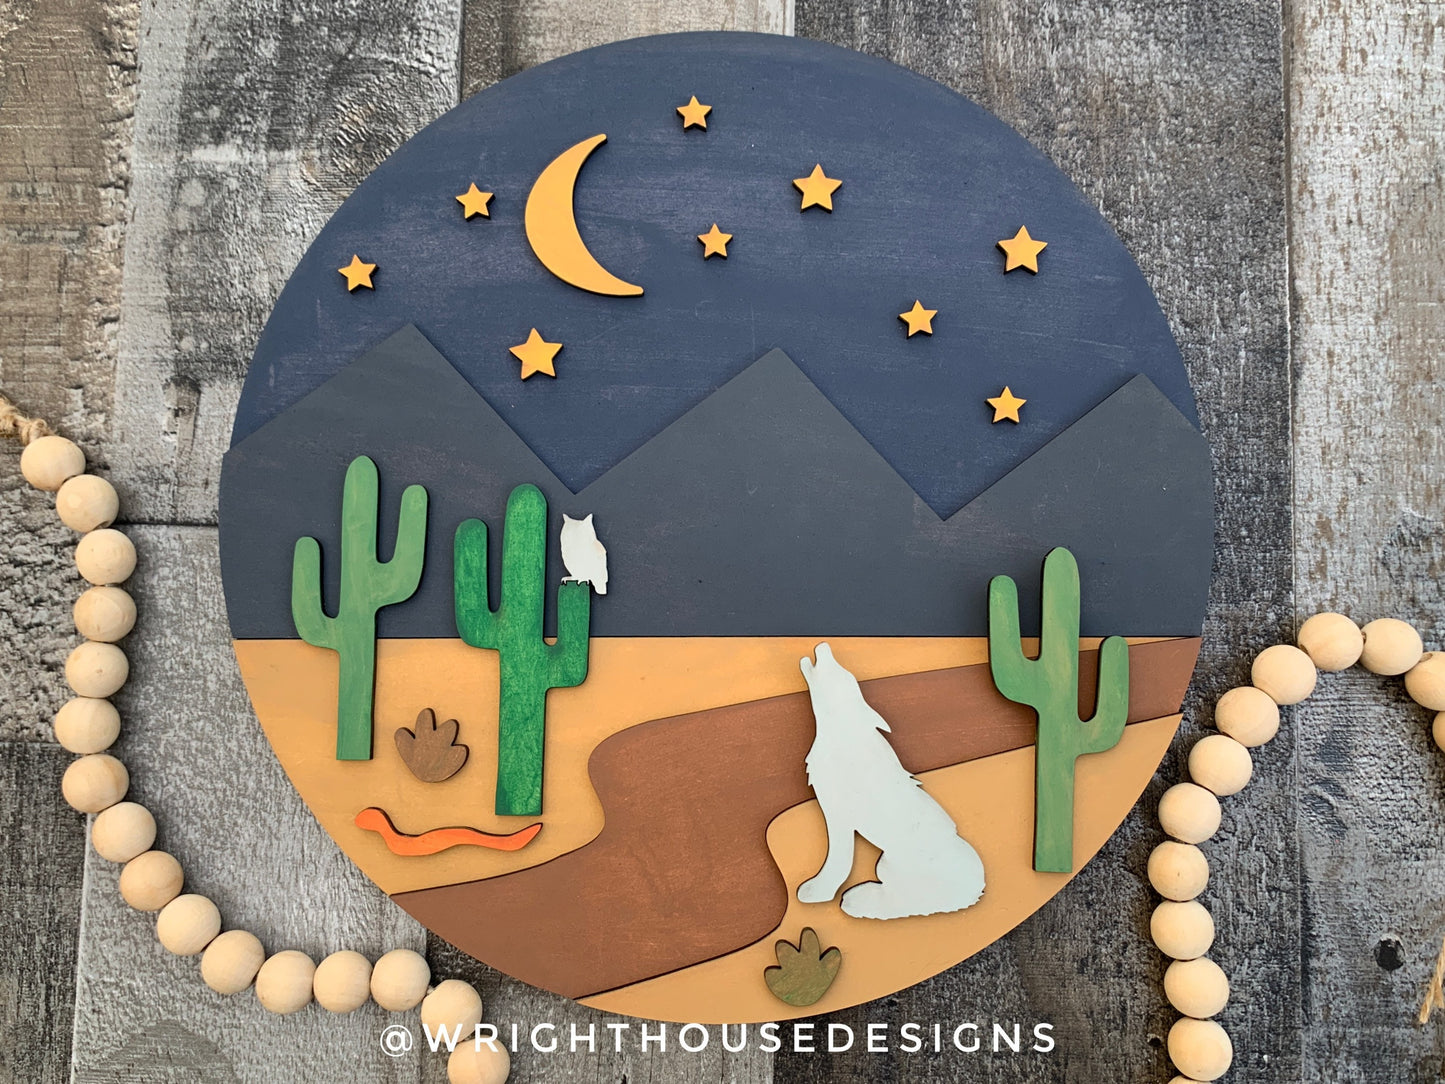 The Desert At Night Baby Boy Nursery Round - Sign Making Home Decor and DIY Kits - Cut File For Glowforge Lasers - Digital SVG File